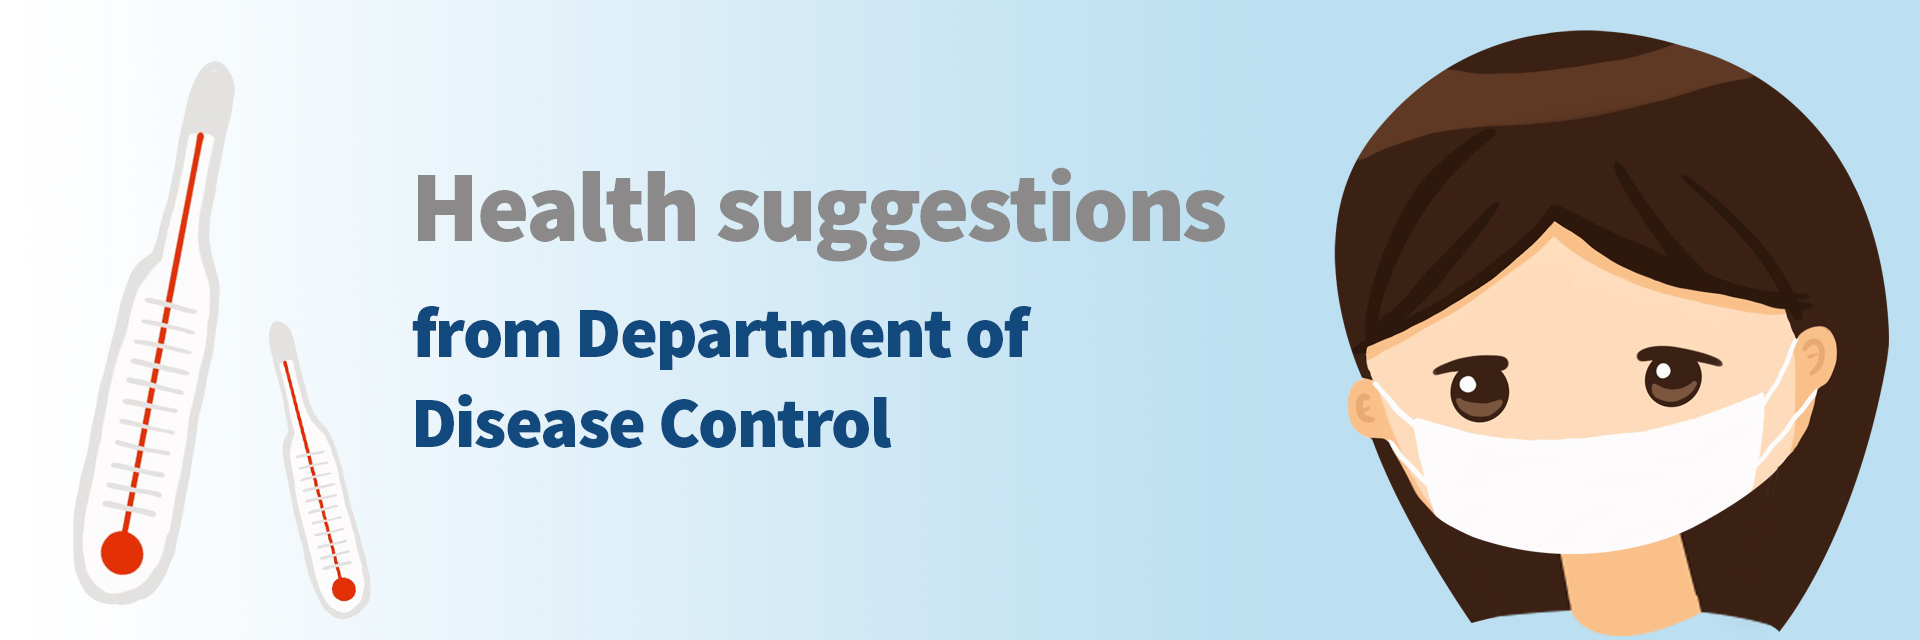 Health suggestions from Department of Disease Control